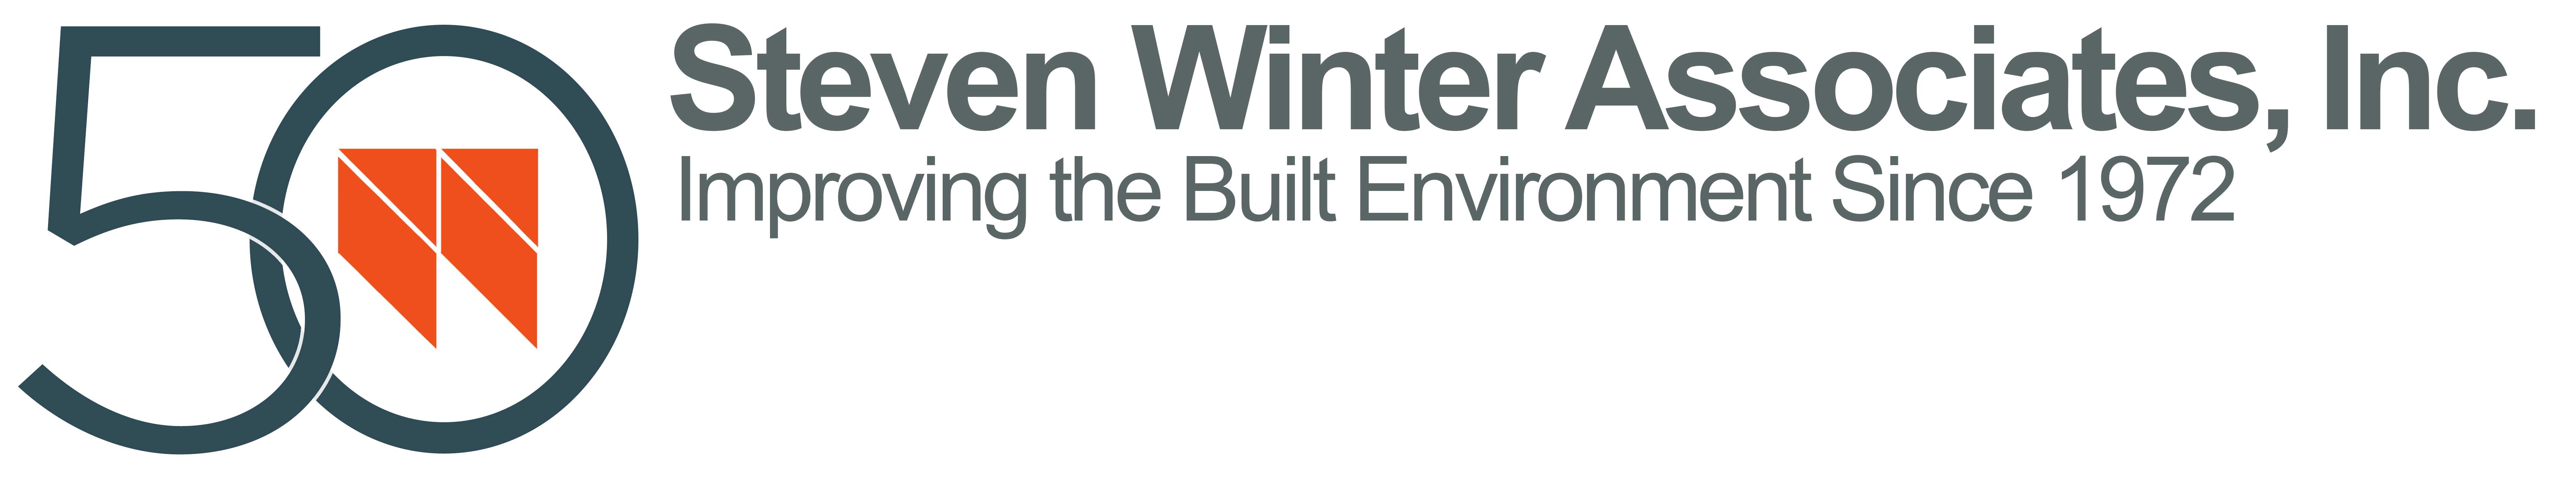 Steven Winter Associates, Incorporated. Improving the Built Environment Since 1972.